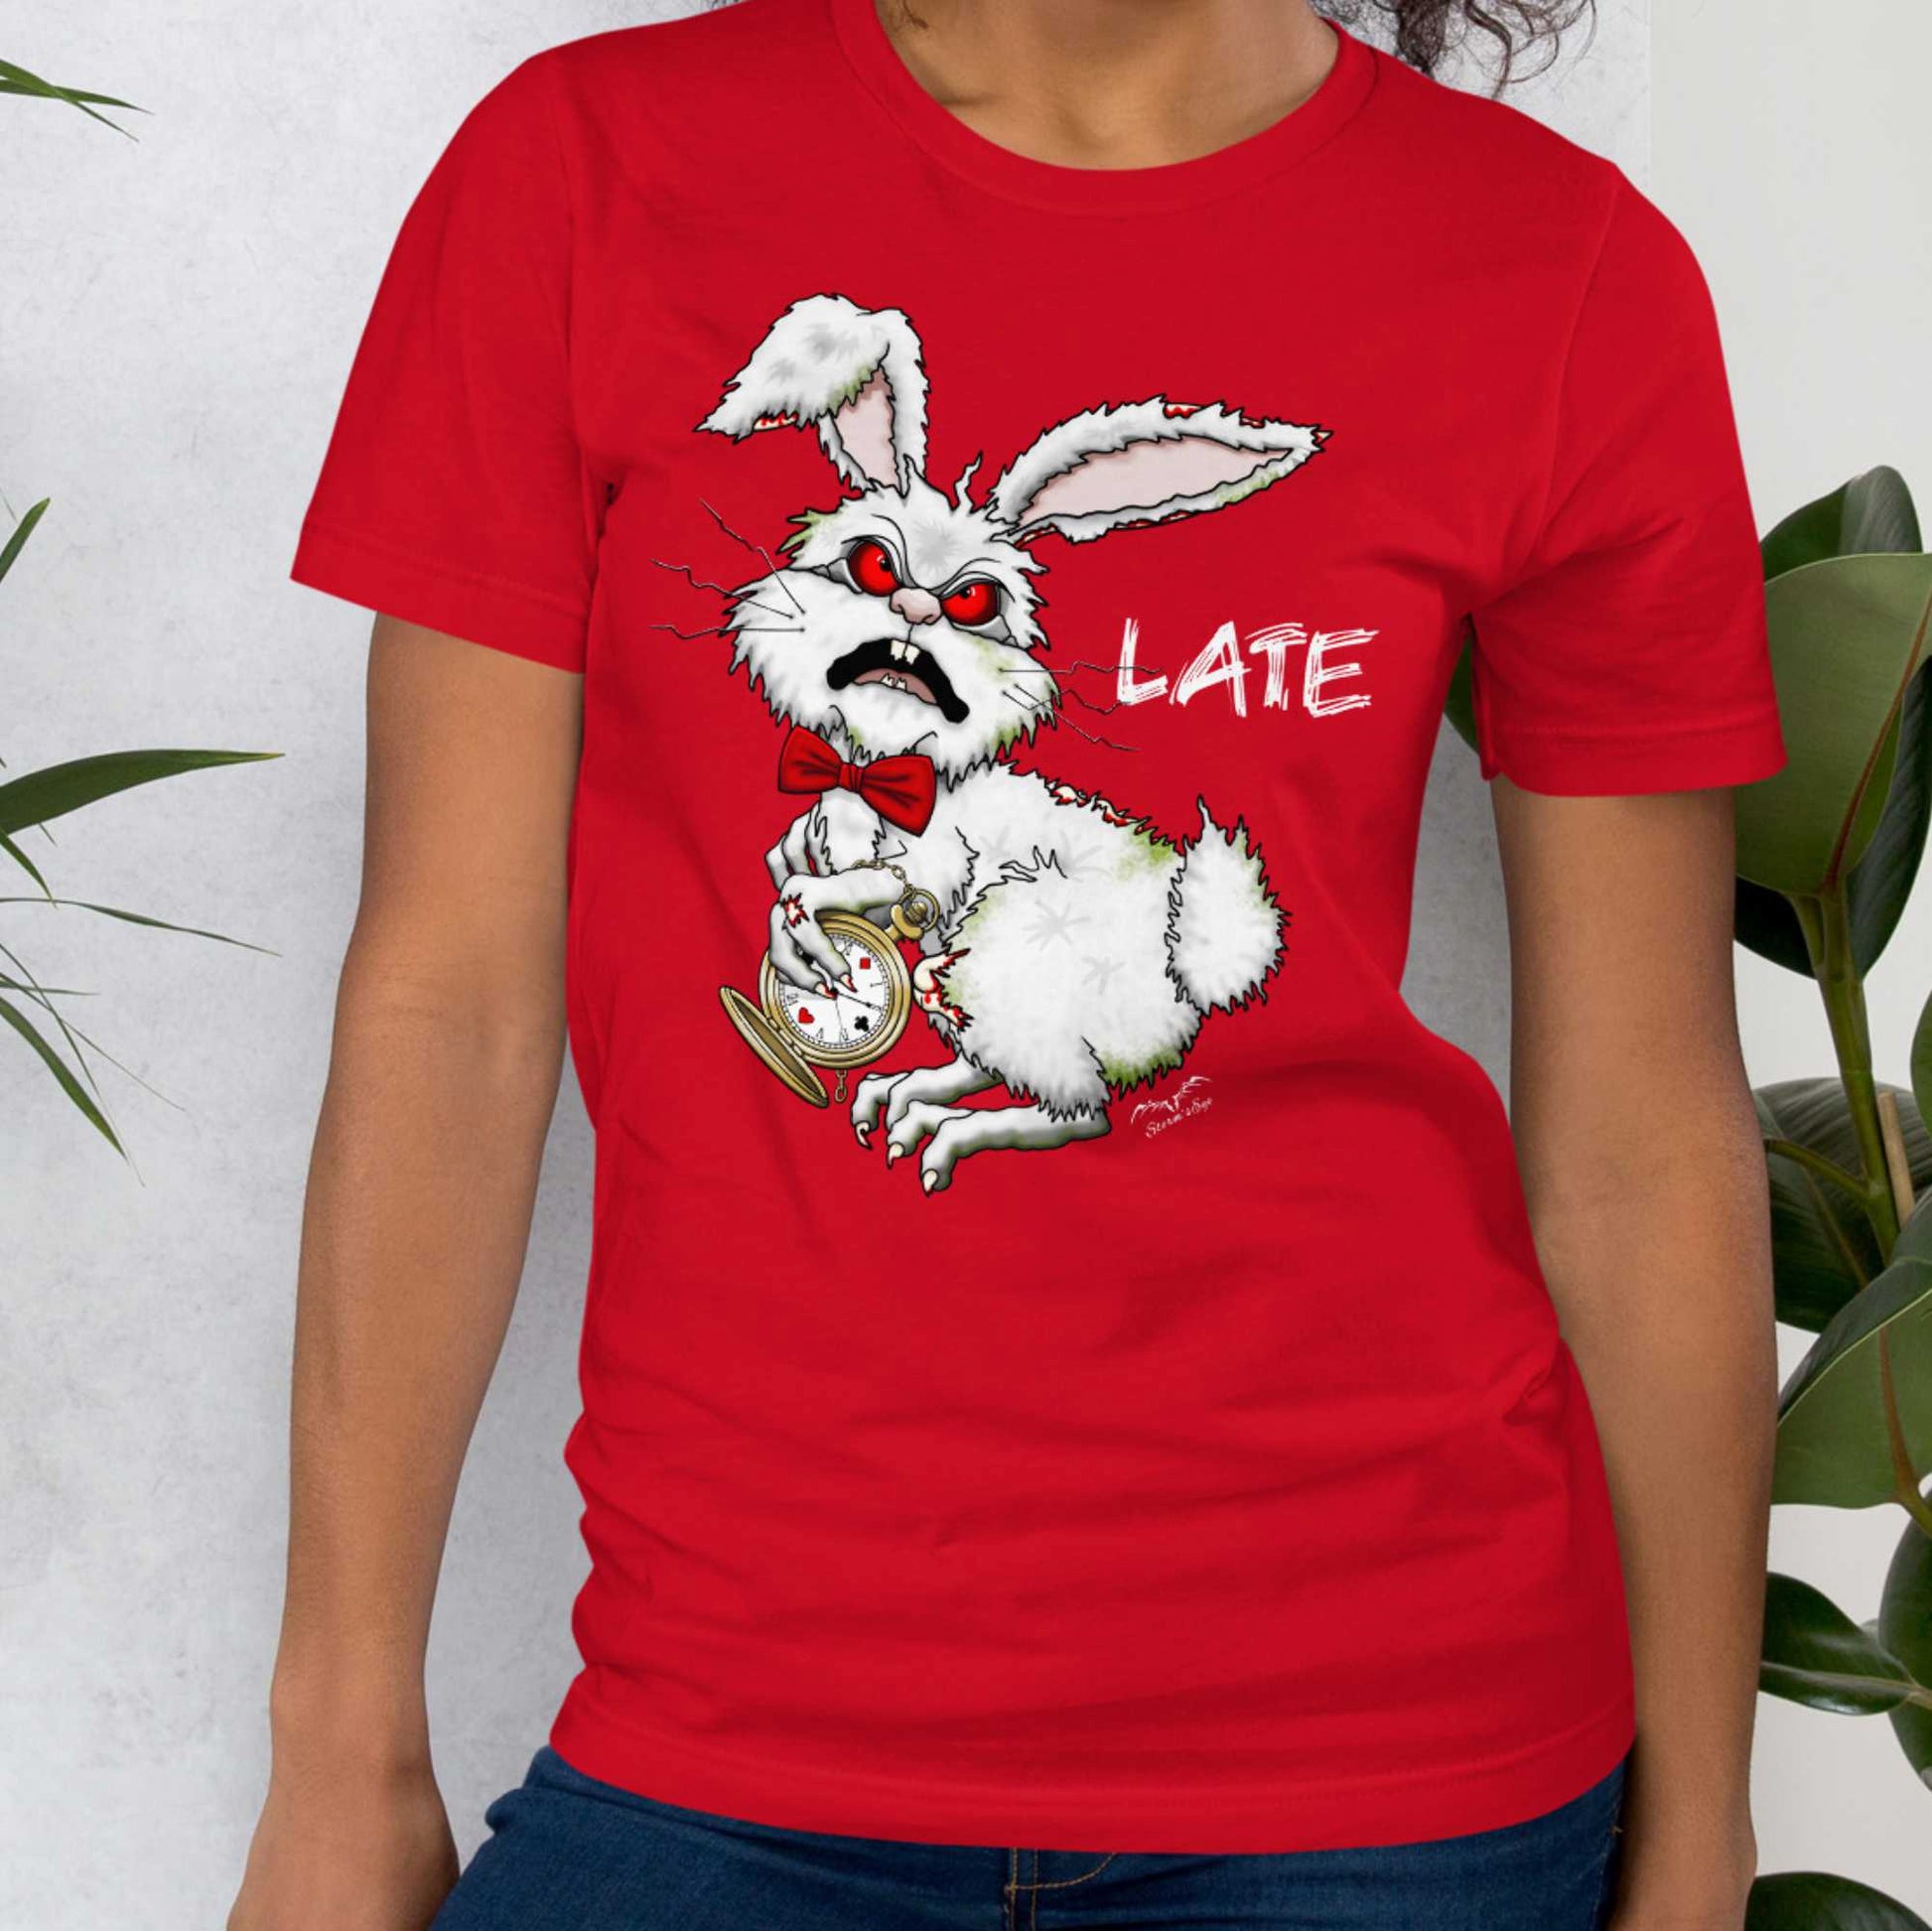 Stormseye Design zombie bunny t shirt, modelled view bright red